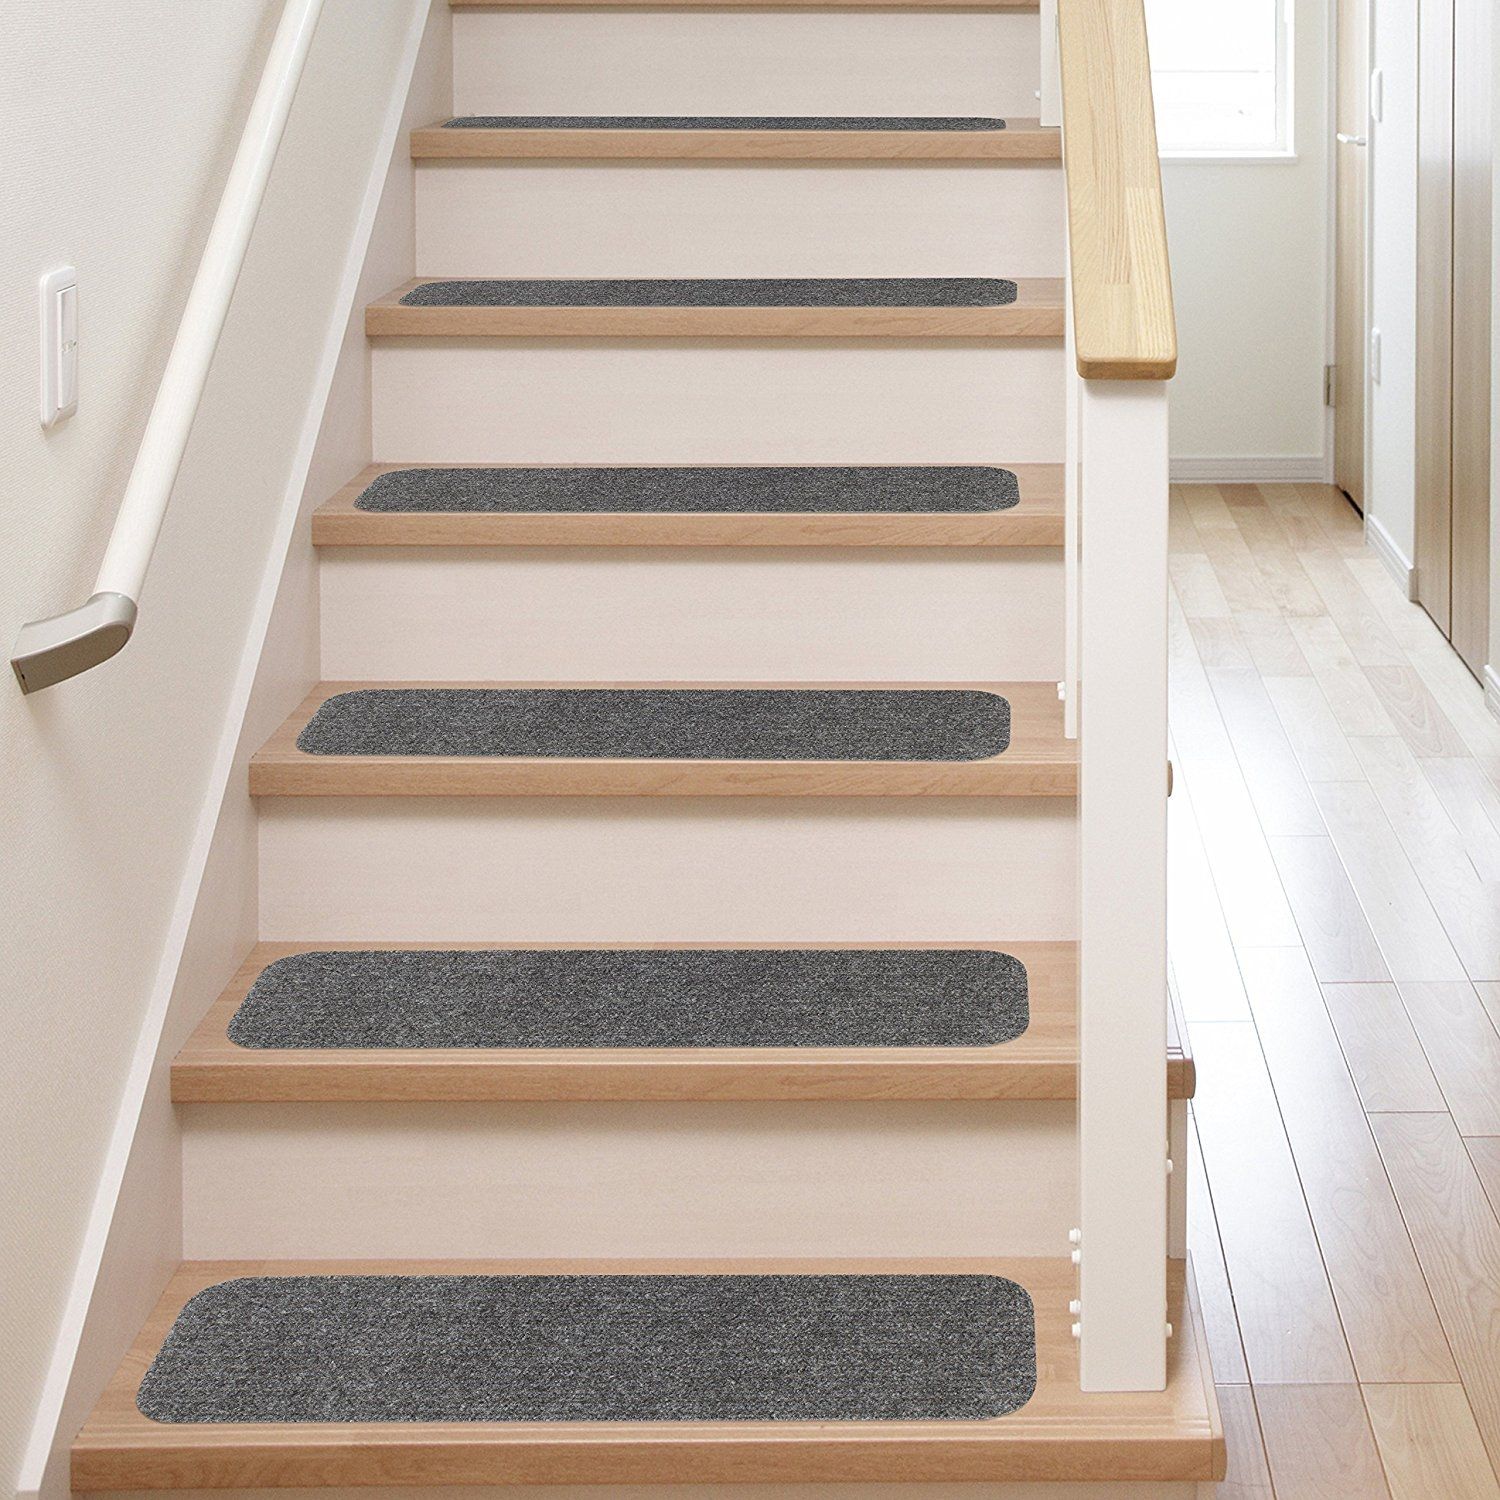 13 Stair Treads Non Slip Carpet Pads Easy Tape Installation Regarding Set Of 13 Stair Tread Rugs (View 6 of 20)